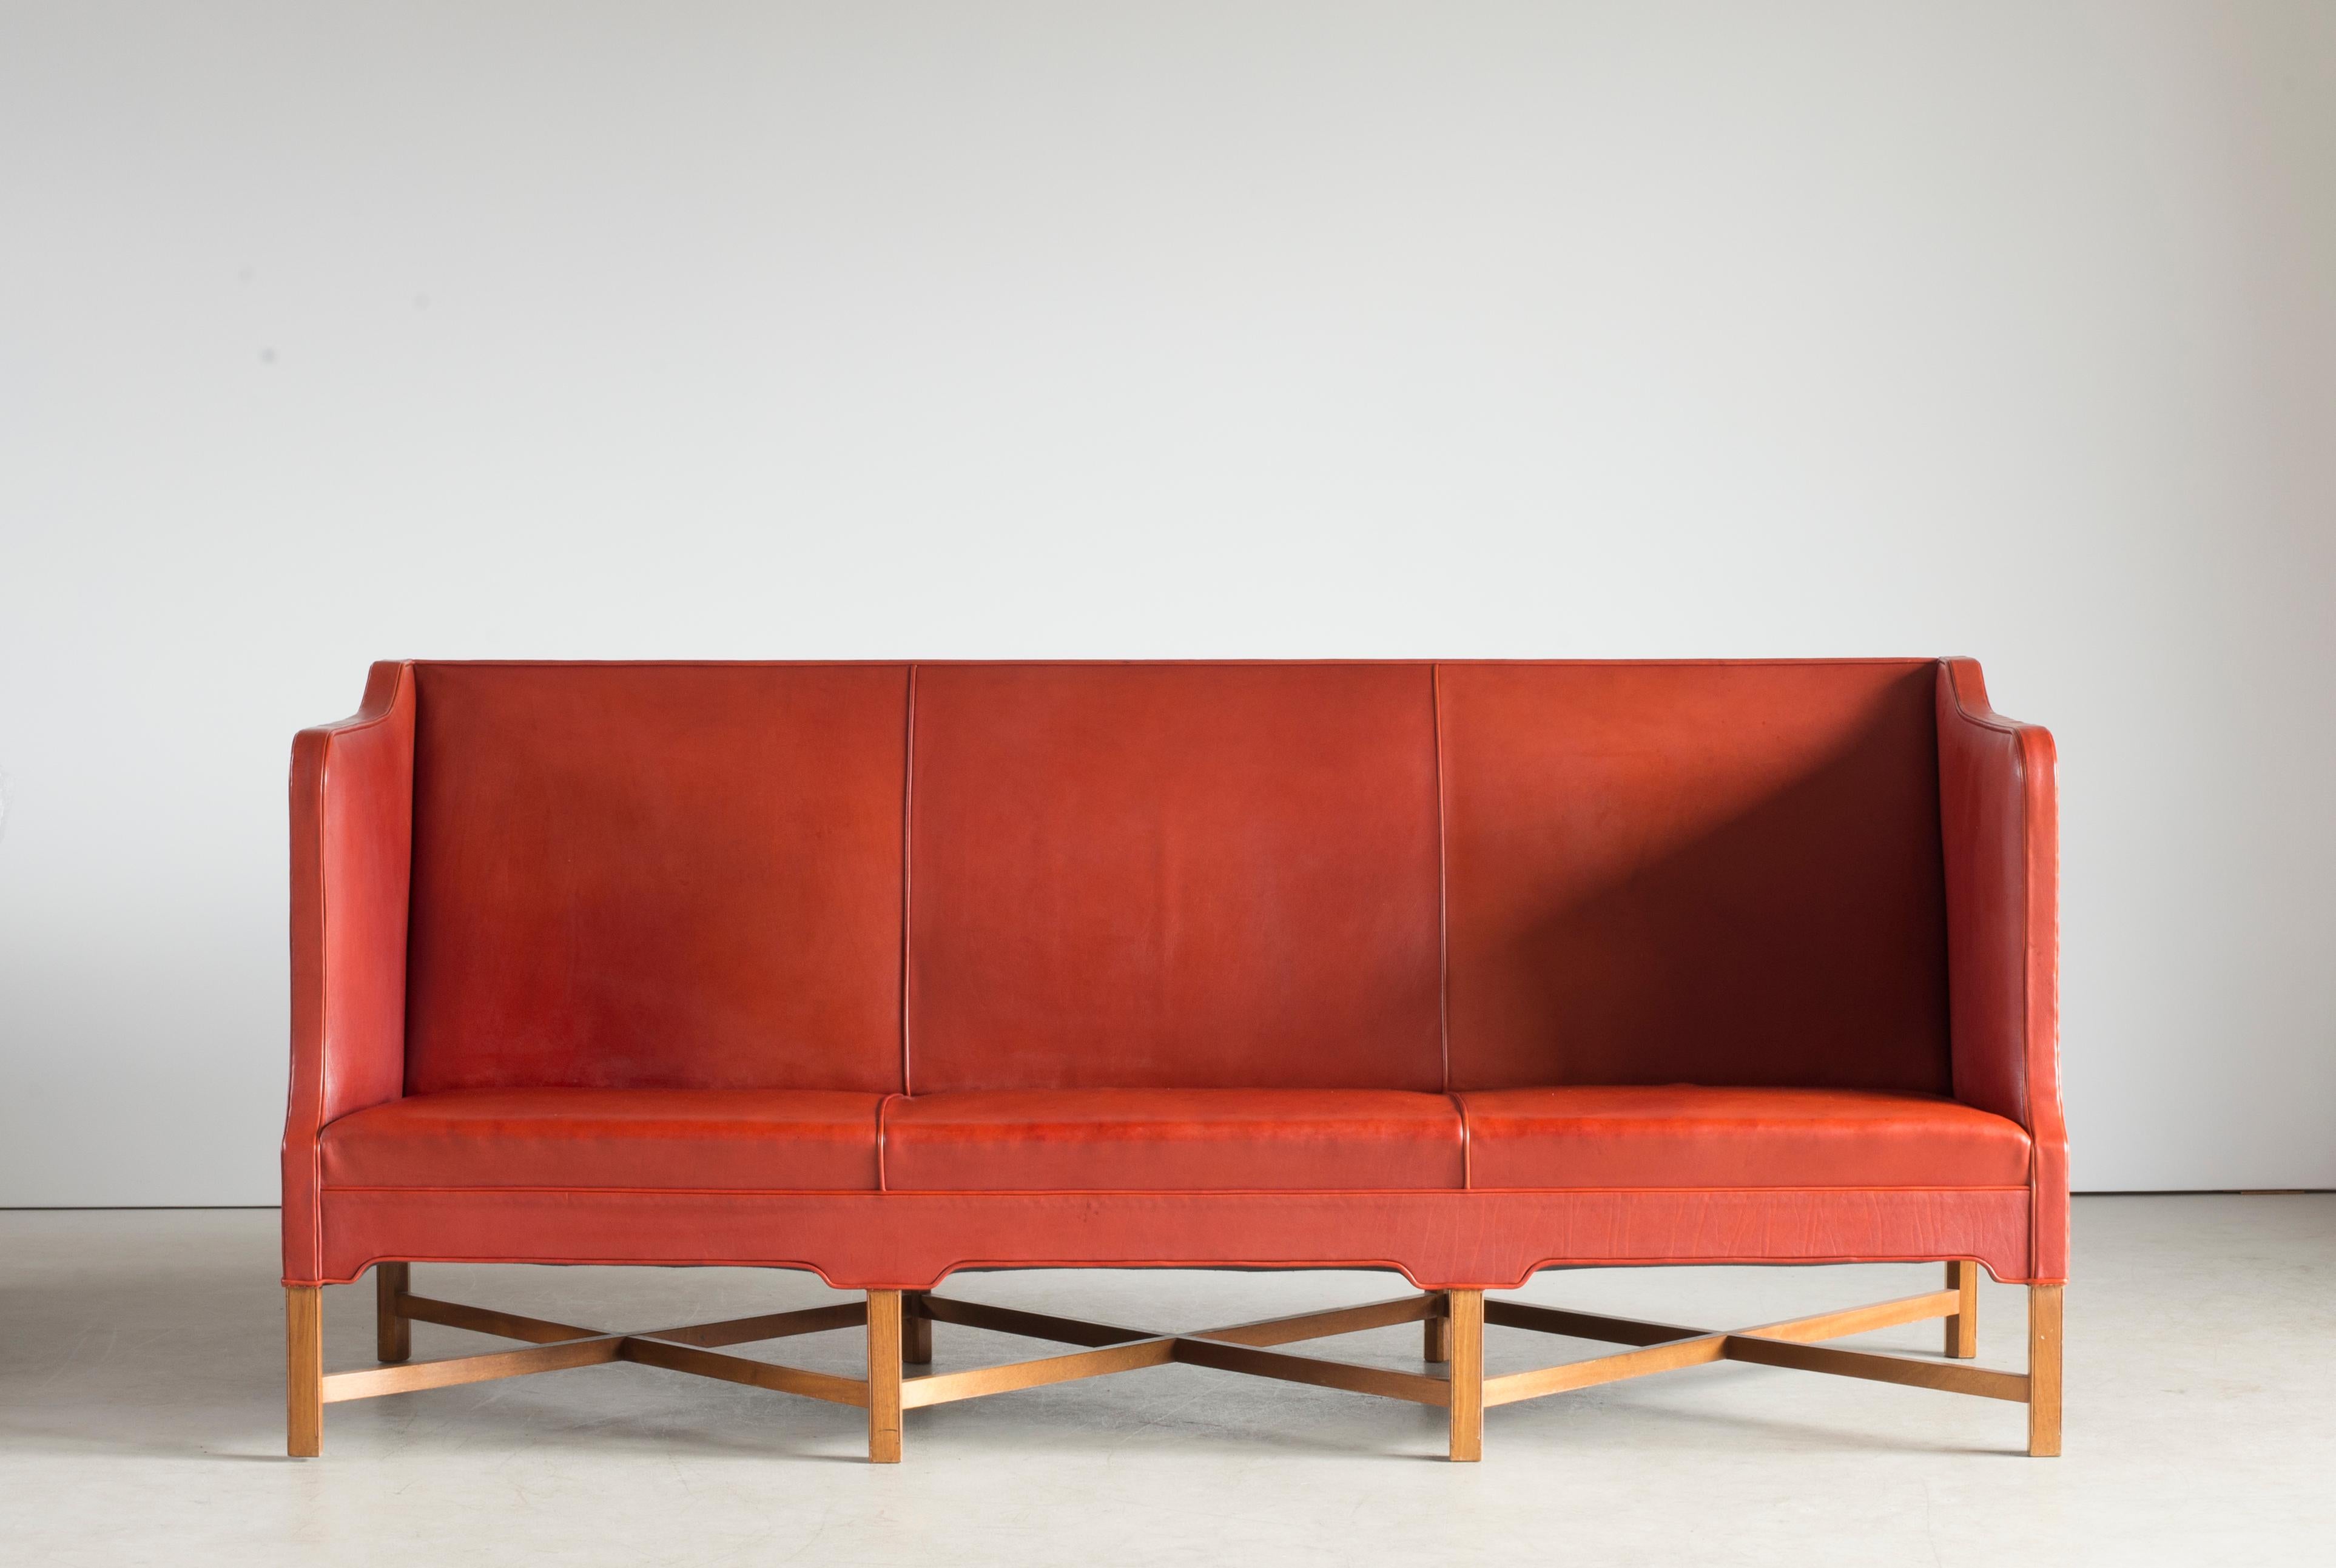 Kaare Klint freestanding three-seat sofa on eight-legged, profiled mahogany cross-frame. Sides, seat and back upholstered with patinated red leather. Model 4118. Executed by Rud. Rasmussen, Nørrebrogade, Copenhagen.